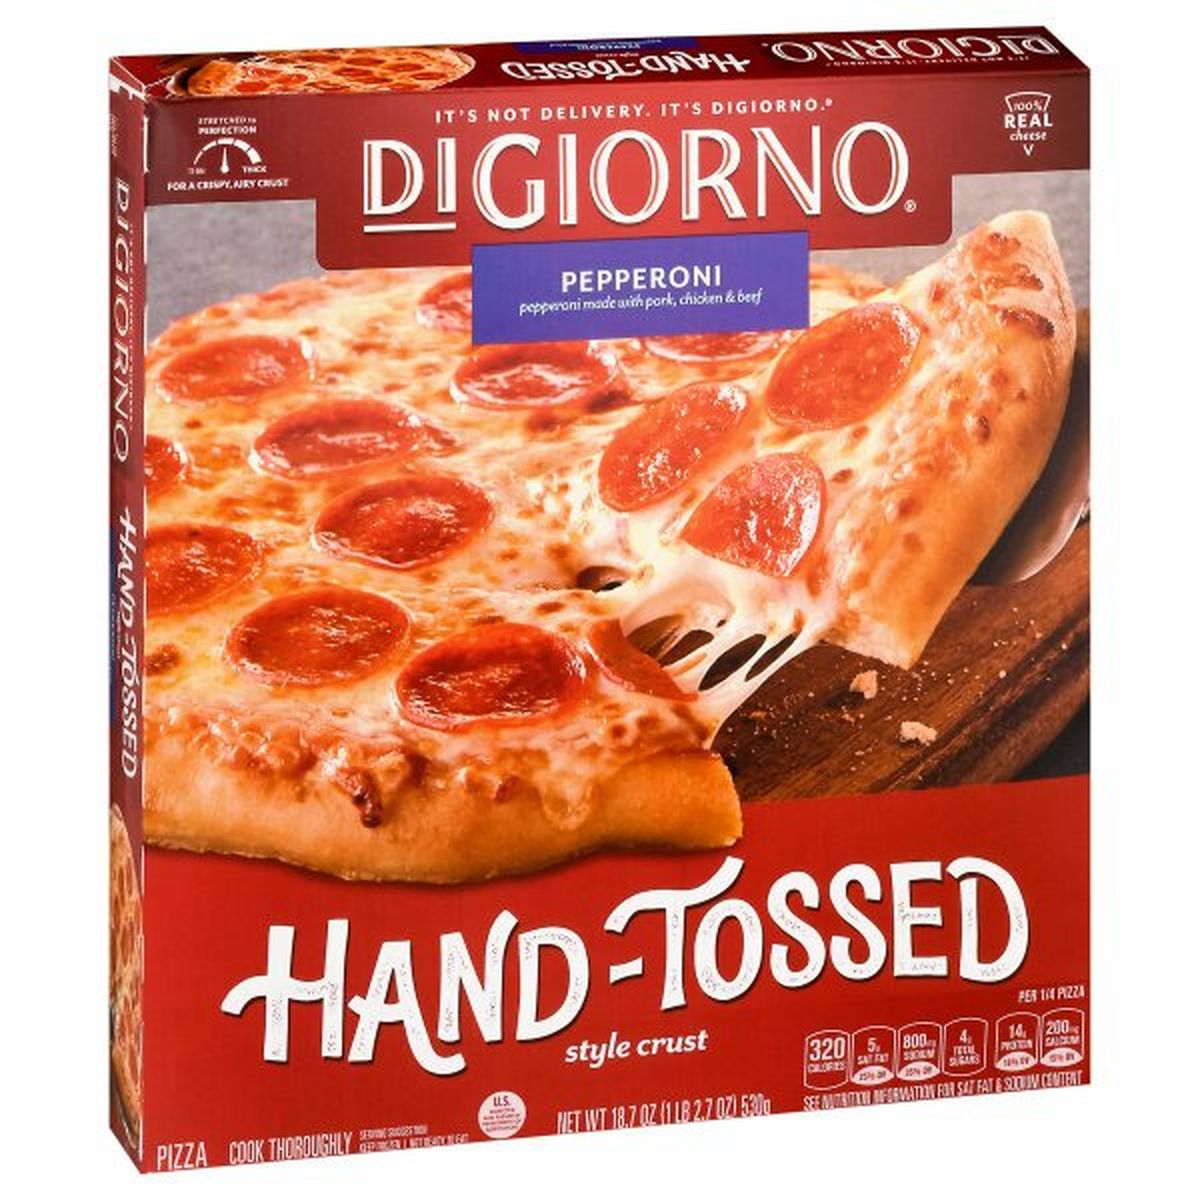 Calories in DiGiorno Pizza, Pepperoni, Hand-Tossed, Style Crust